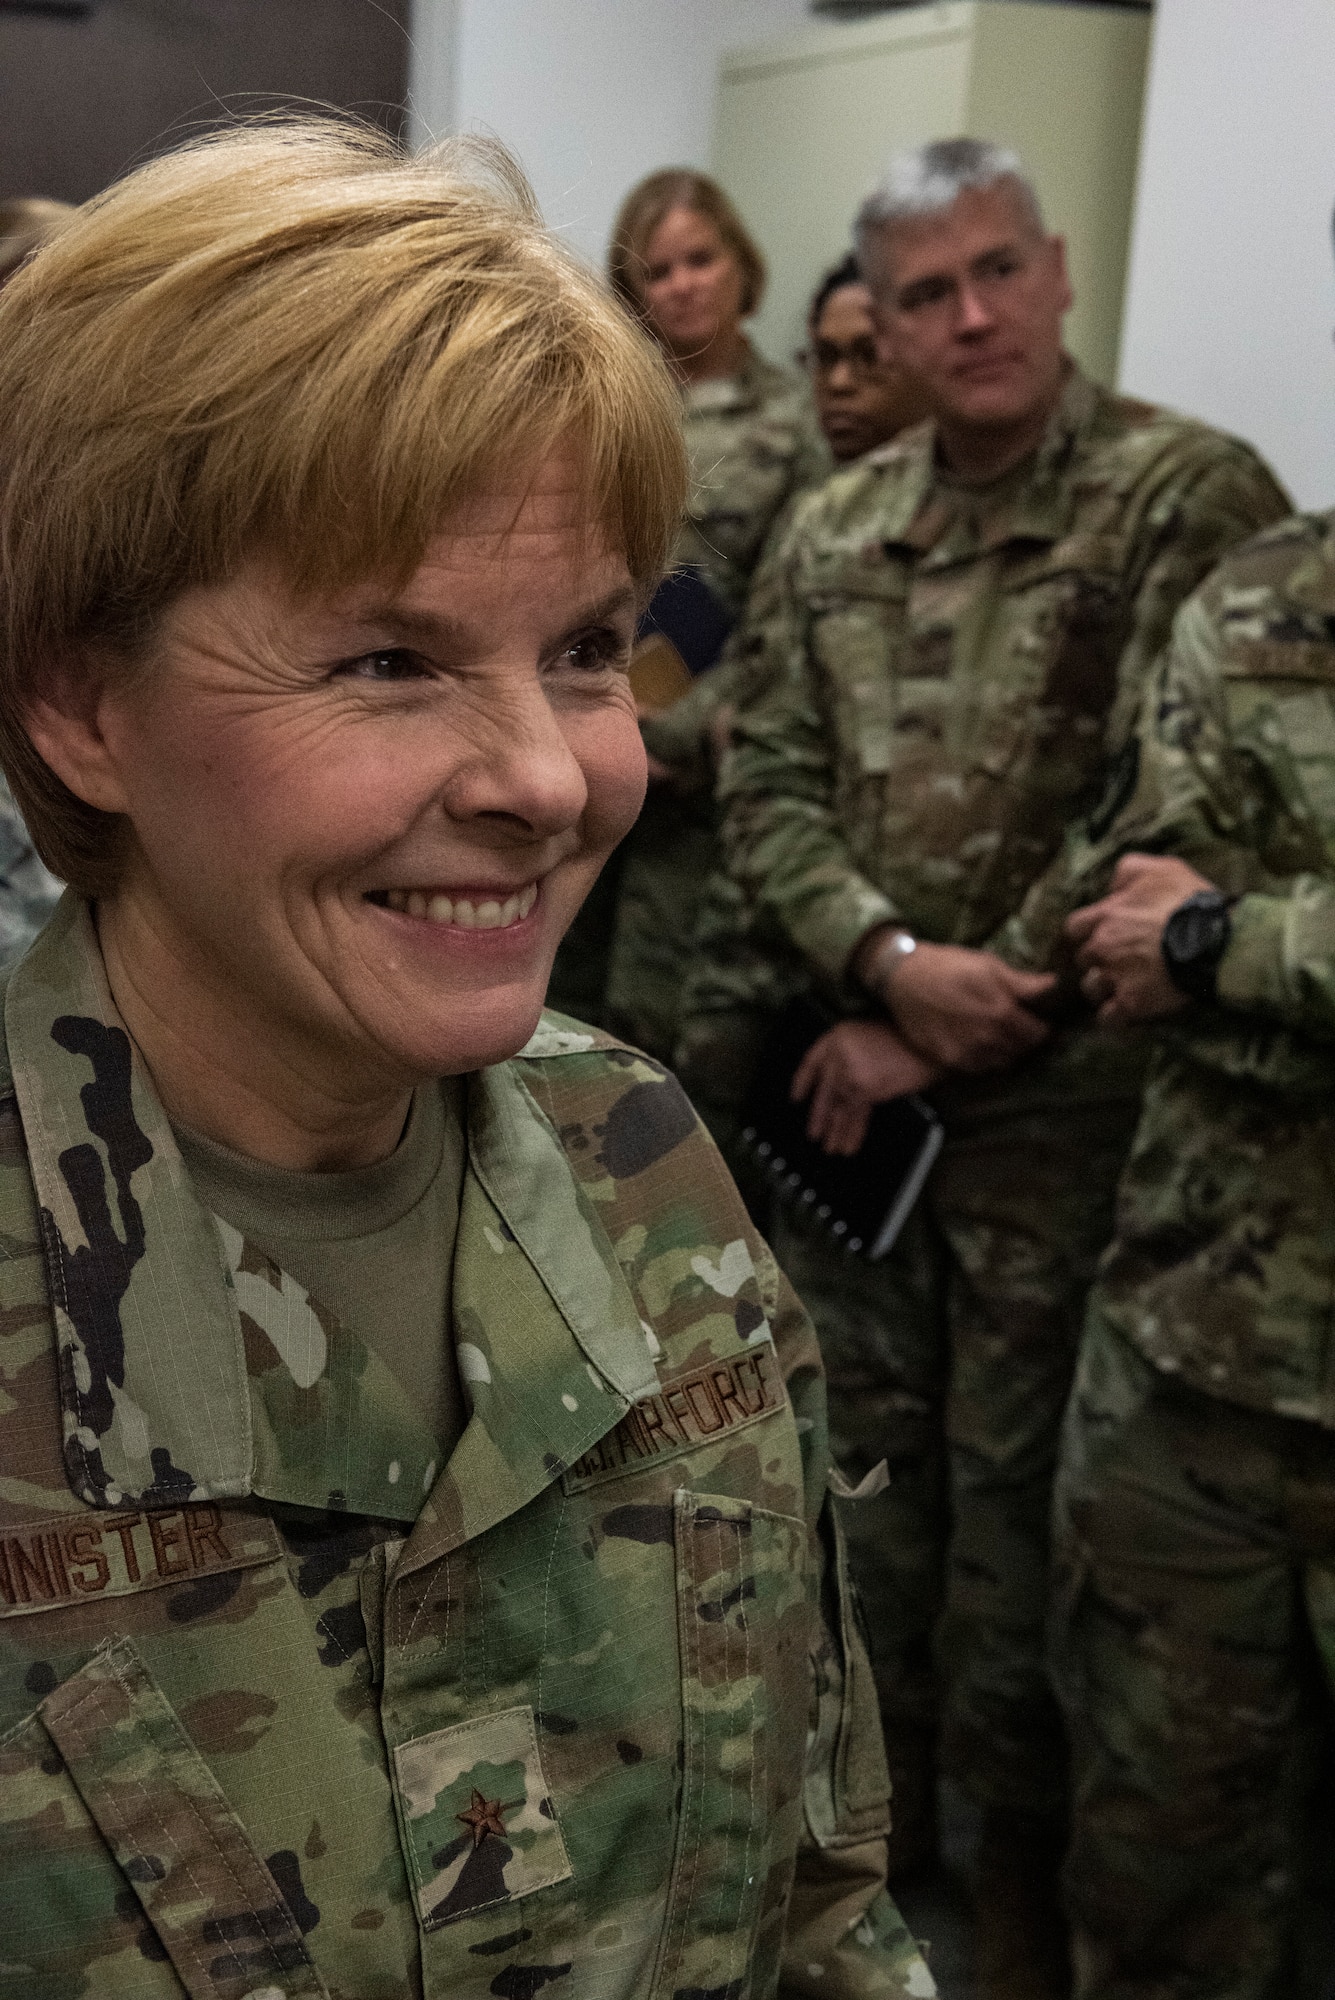 U.S. Air Force Brig. Gen. Sharon Bannister, Air Combat Command Surgeon General, smiles during a tour of the 325th Medical Group at Tyndall Air Force Base, Florida, Dec. 18, 2019. Bannister visited several sections of the unit including the pharmacy, laboratory, dental and optometry, just to name a few. (U.S. Air Force photo by Staff Sgt. Magen. M. Reeves)